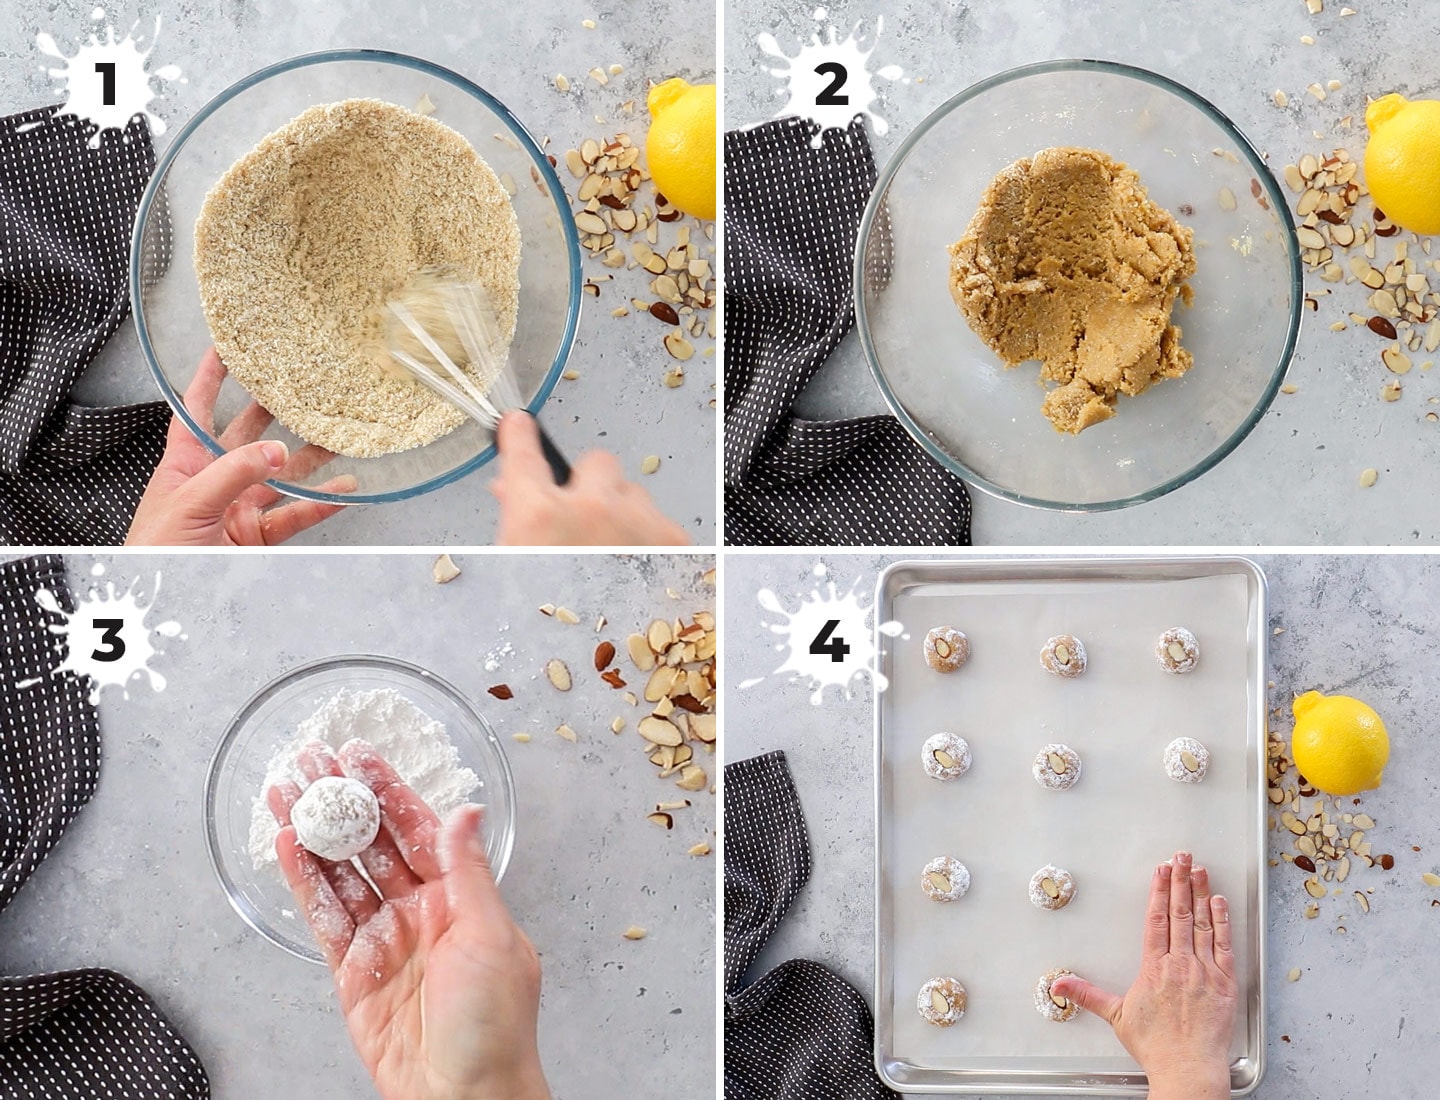 A collage of 4 images showing how to make almond coconut cookies.